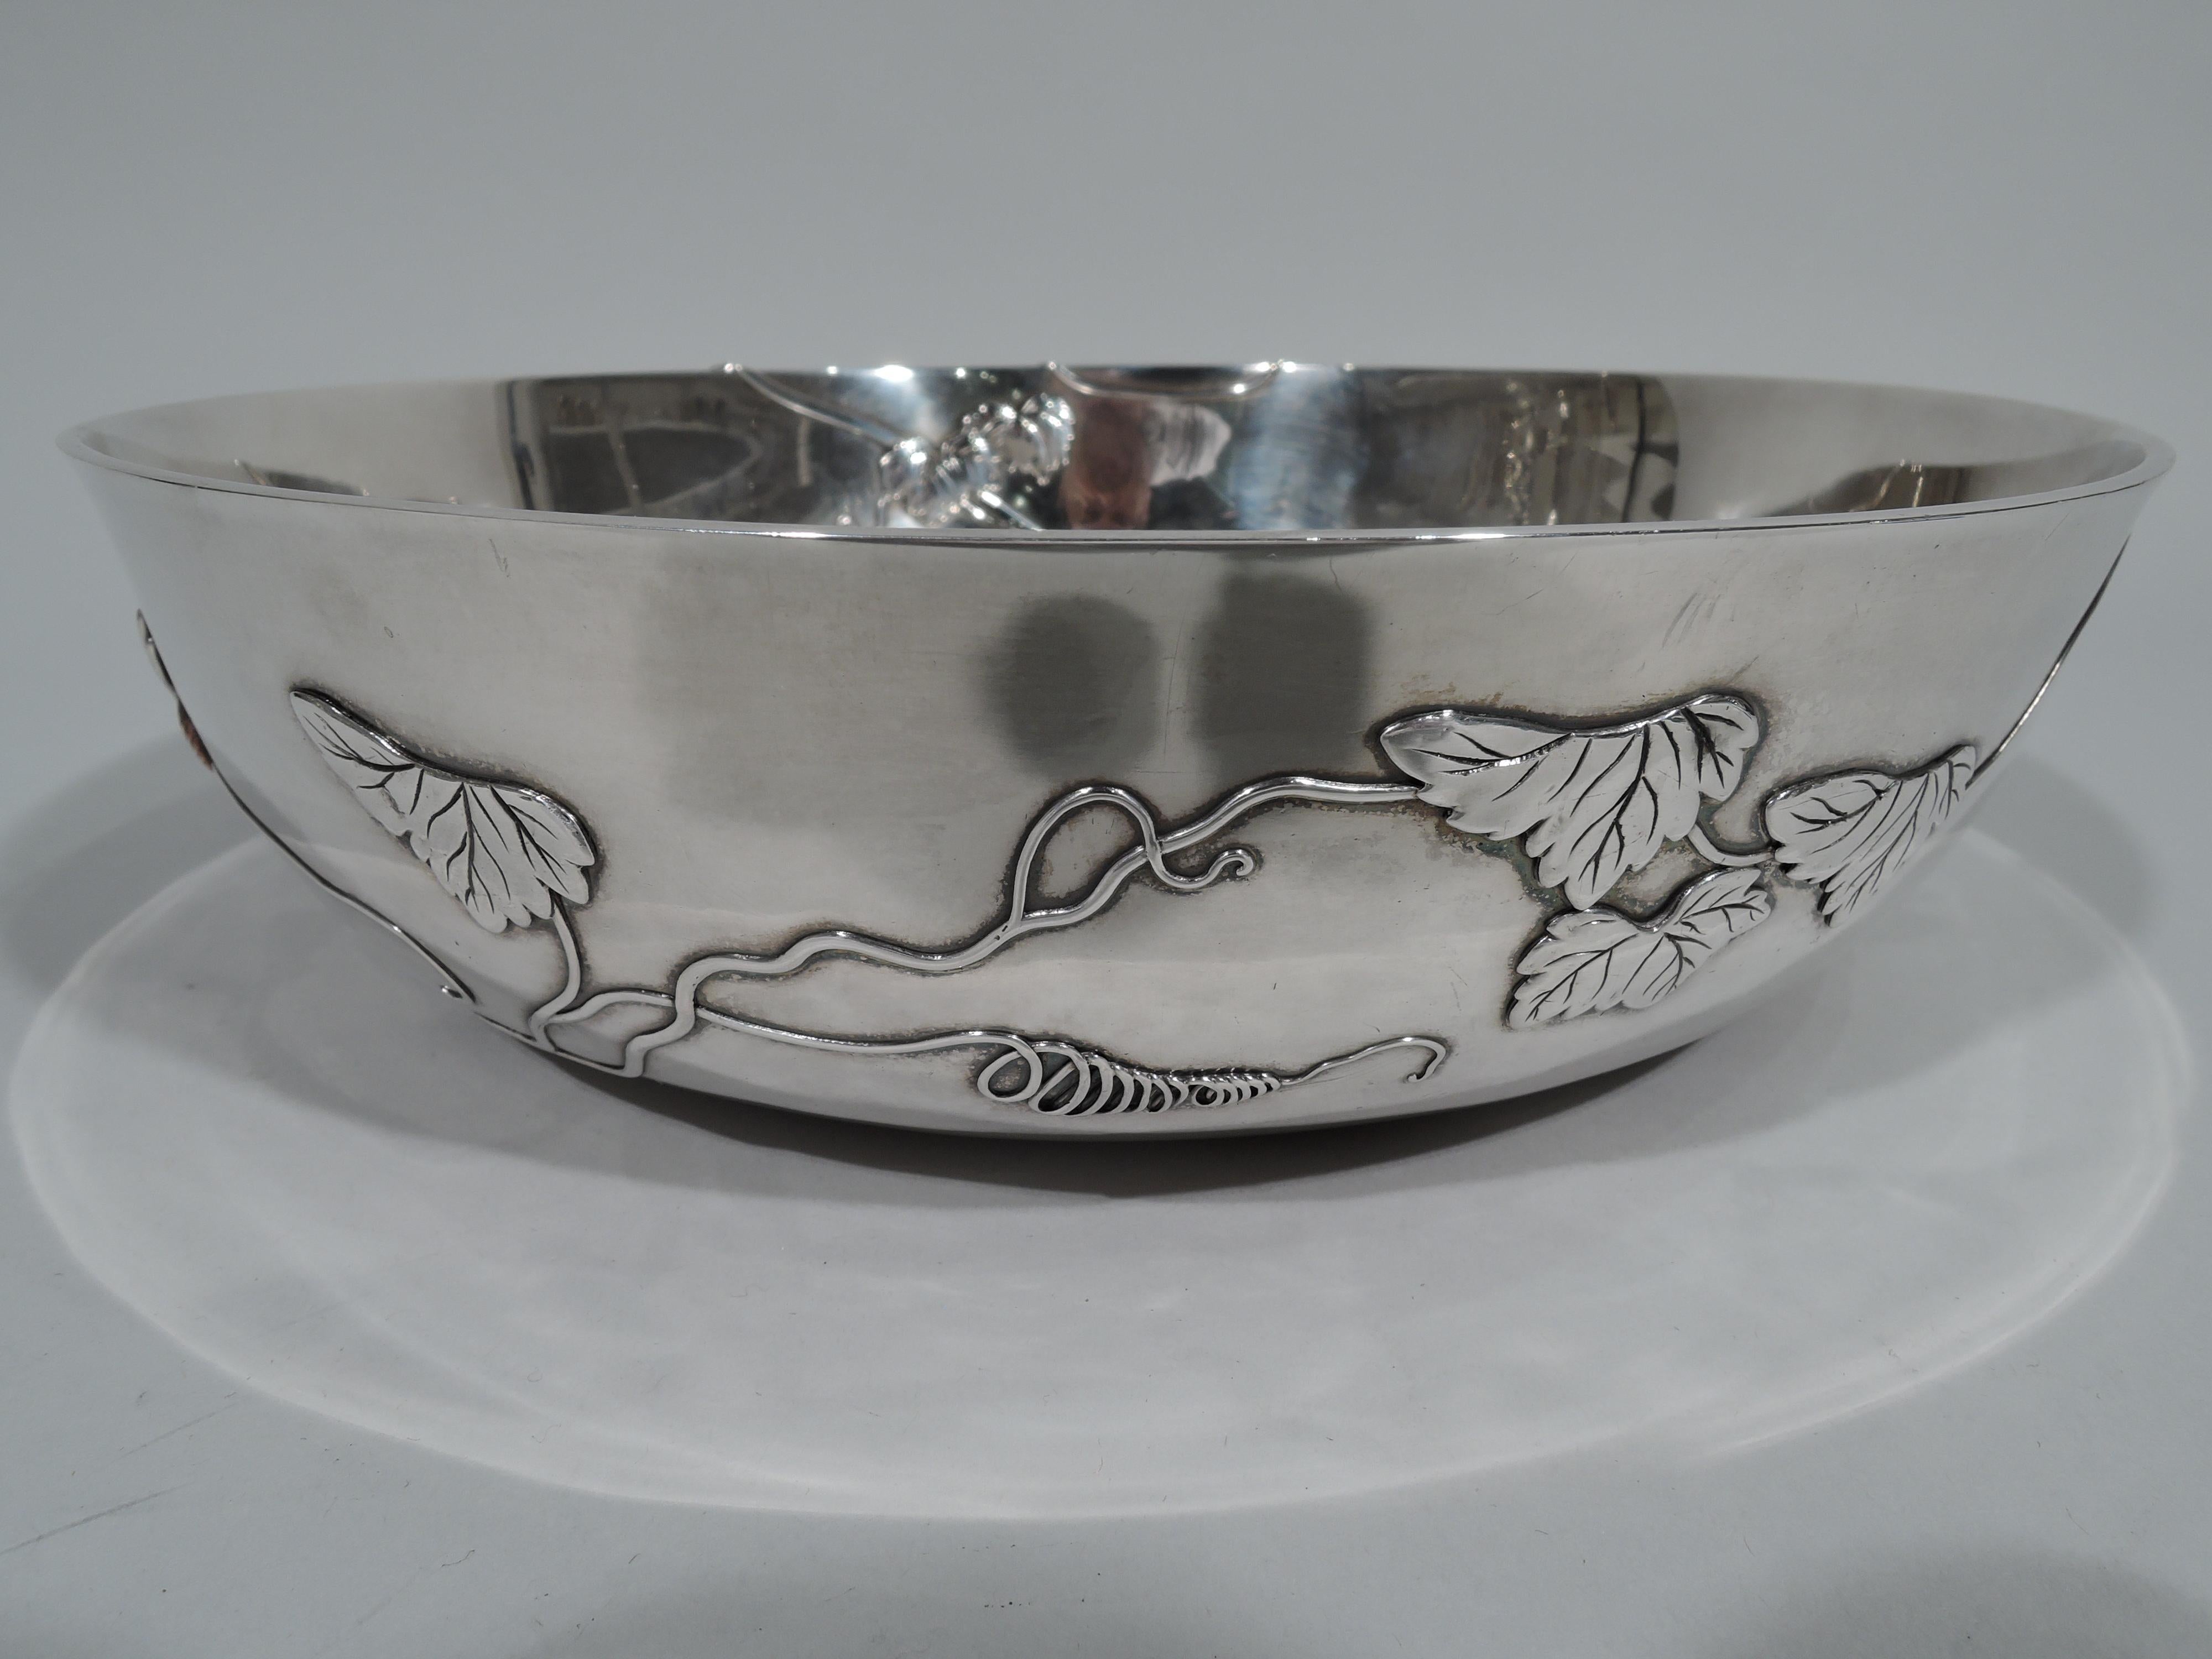 Japonisme Tiffany Japonesque Mixed Metal and Sterling Silver Bowl with Dragonfly